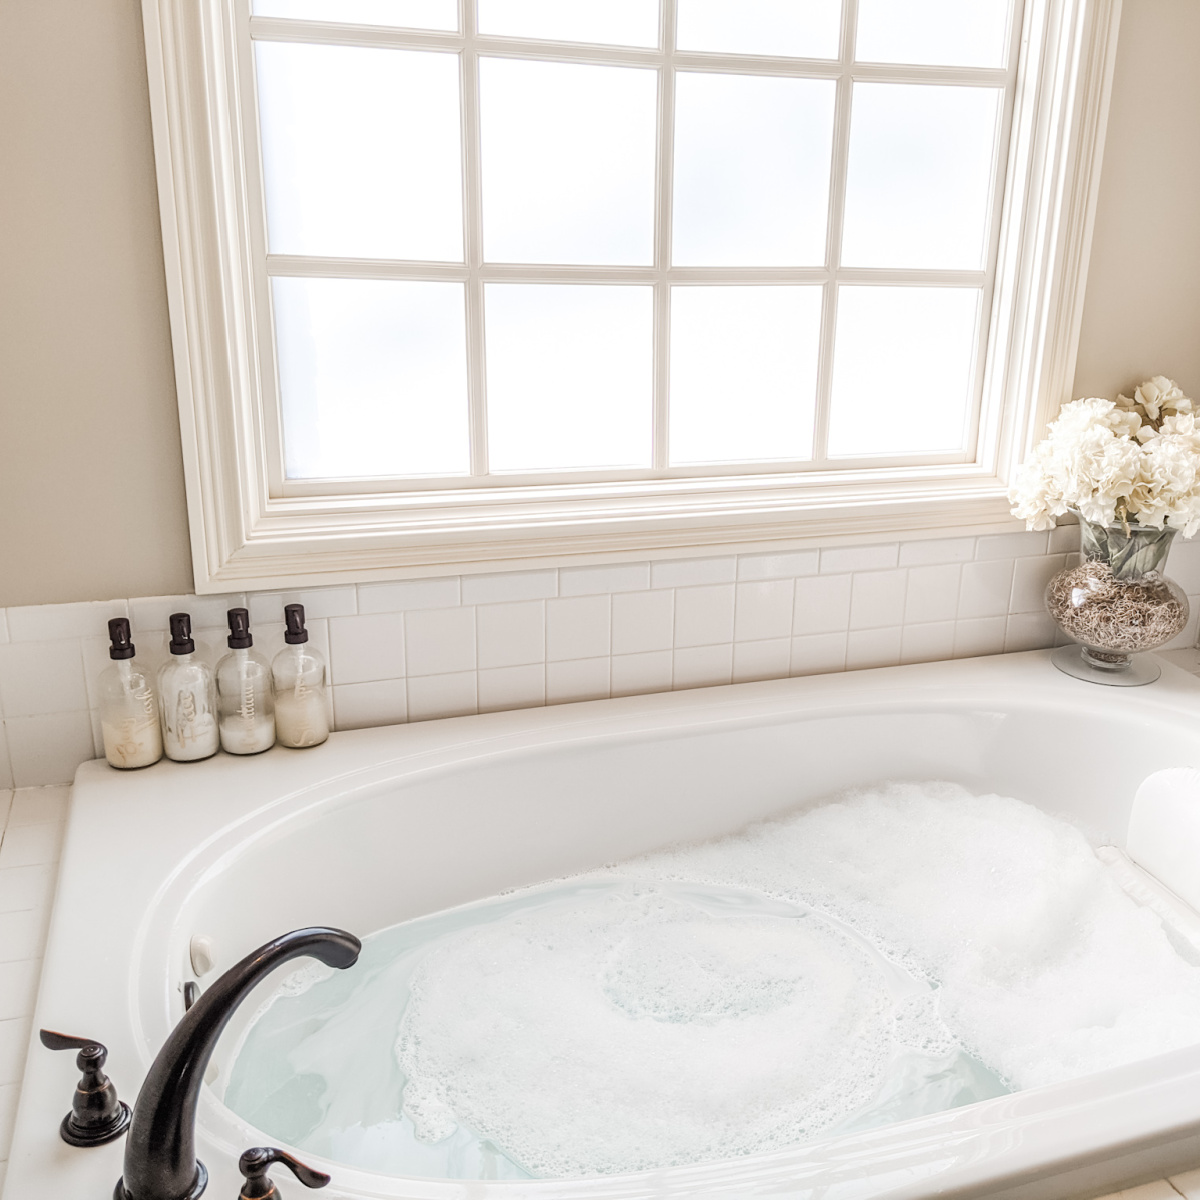 How to Clean Bathtub Jets